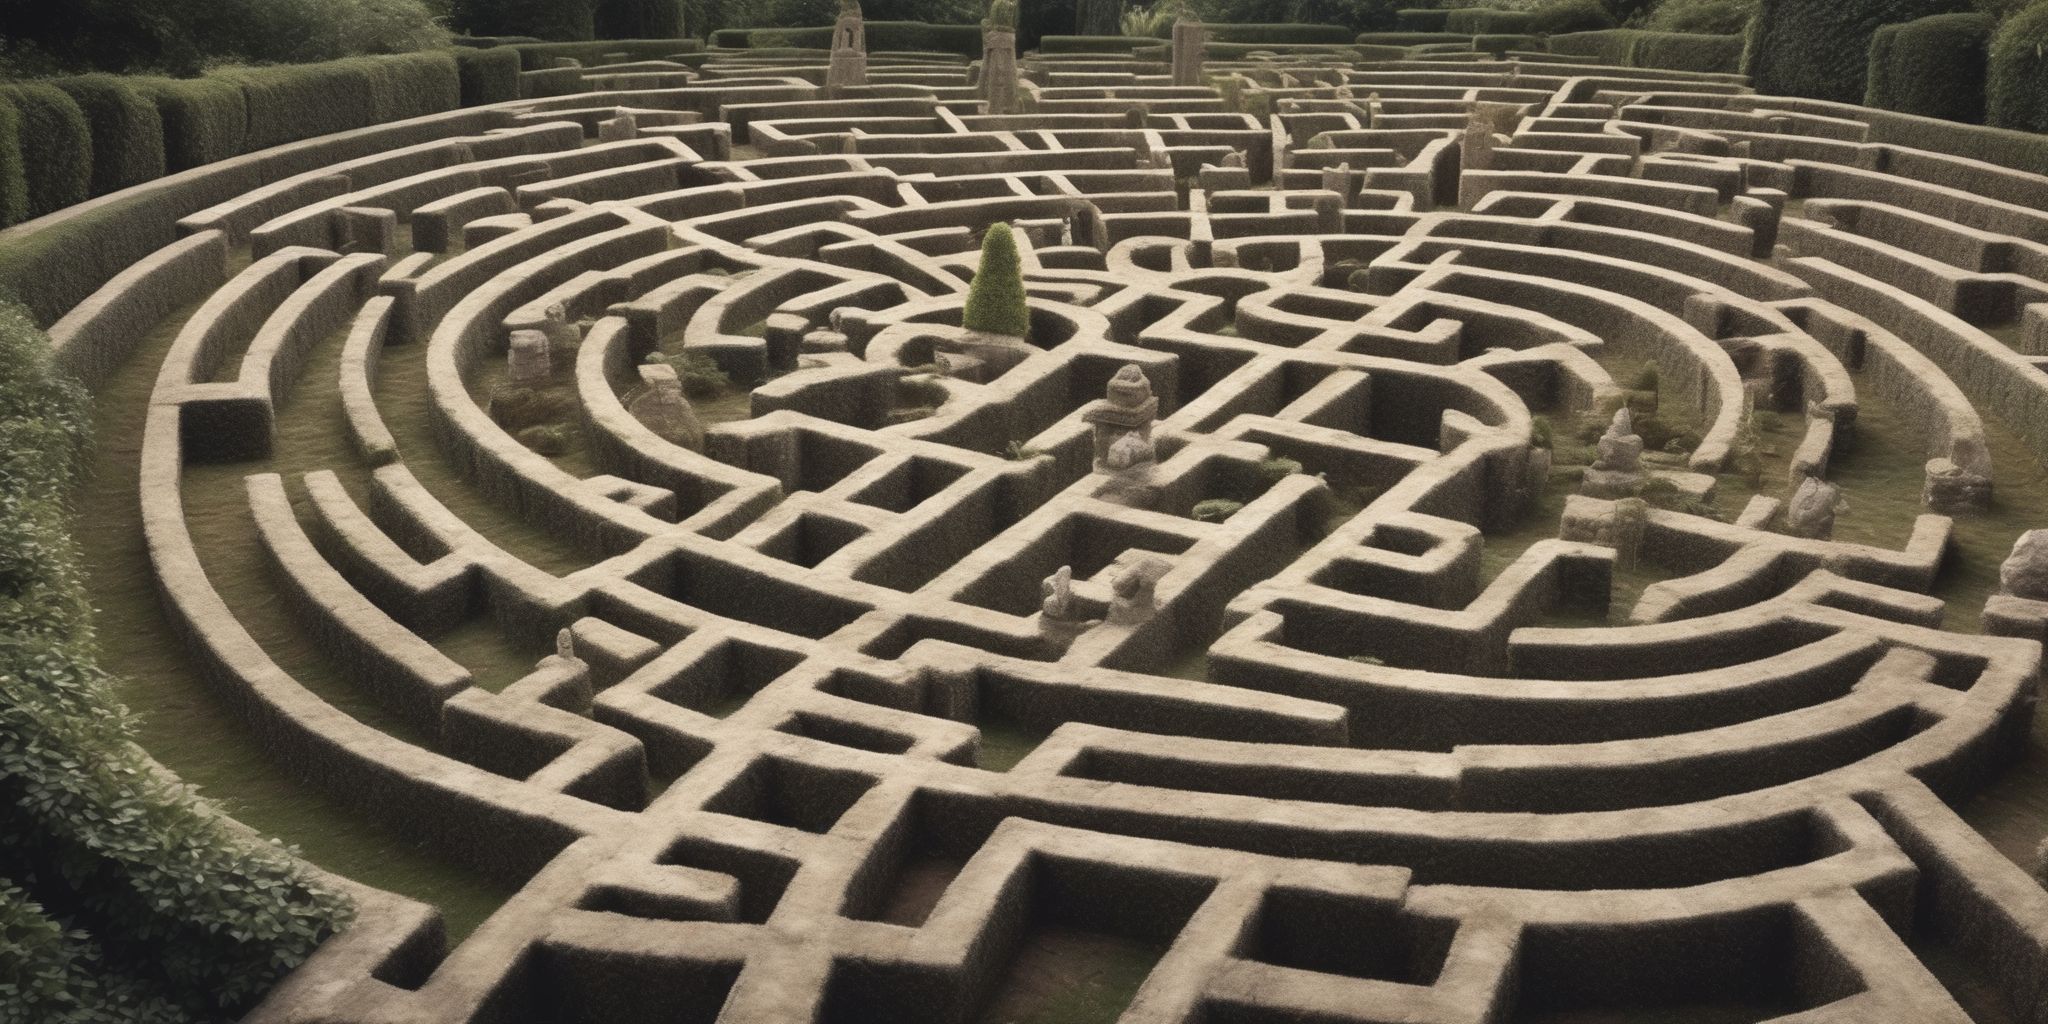 Labyrinth  in realistic, photographic style